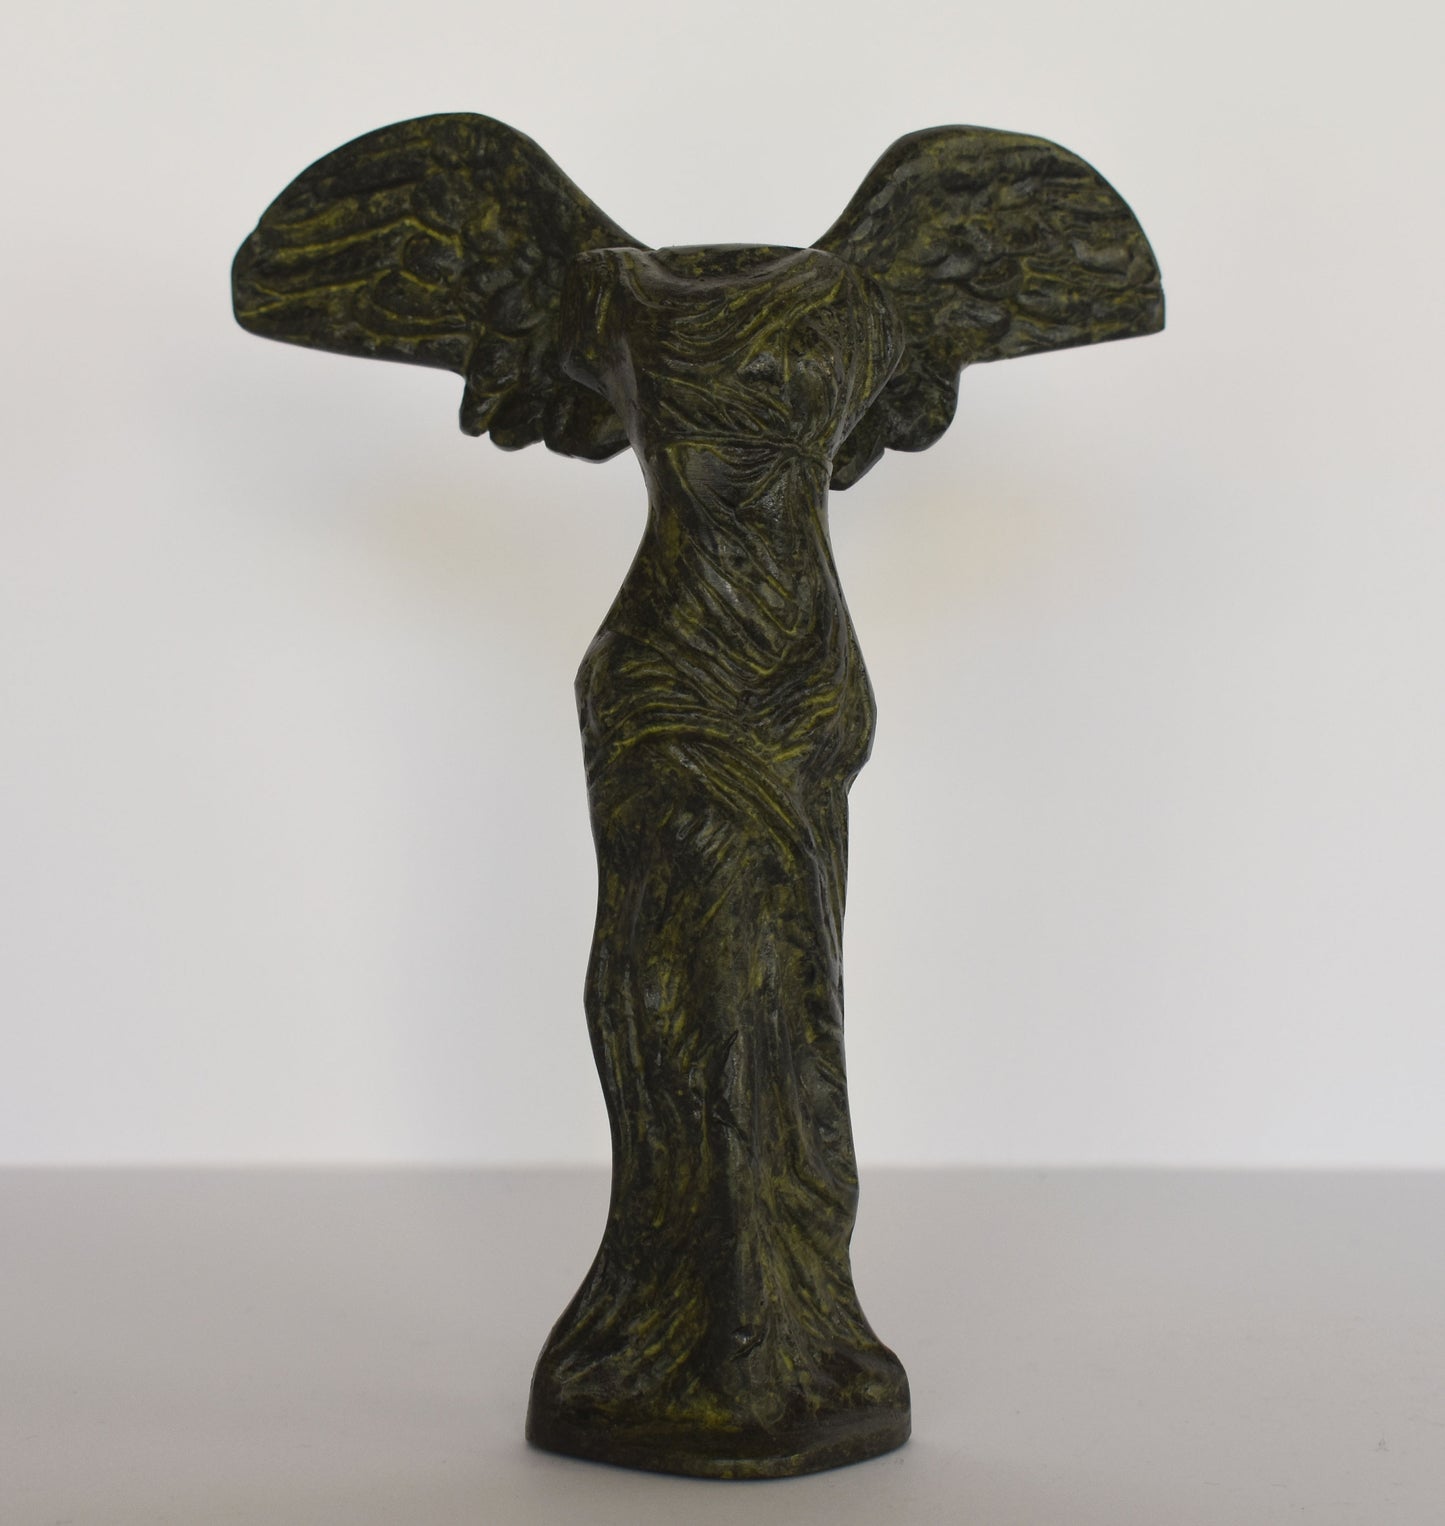 Nike of Samothrace - Victory - pure Bronze Sculpture